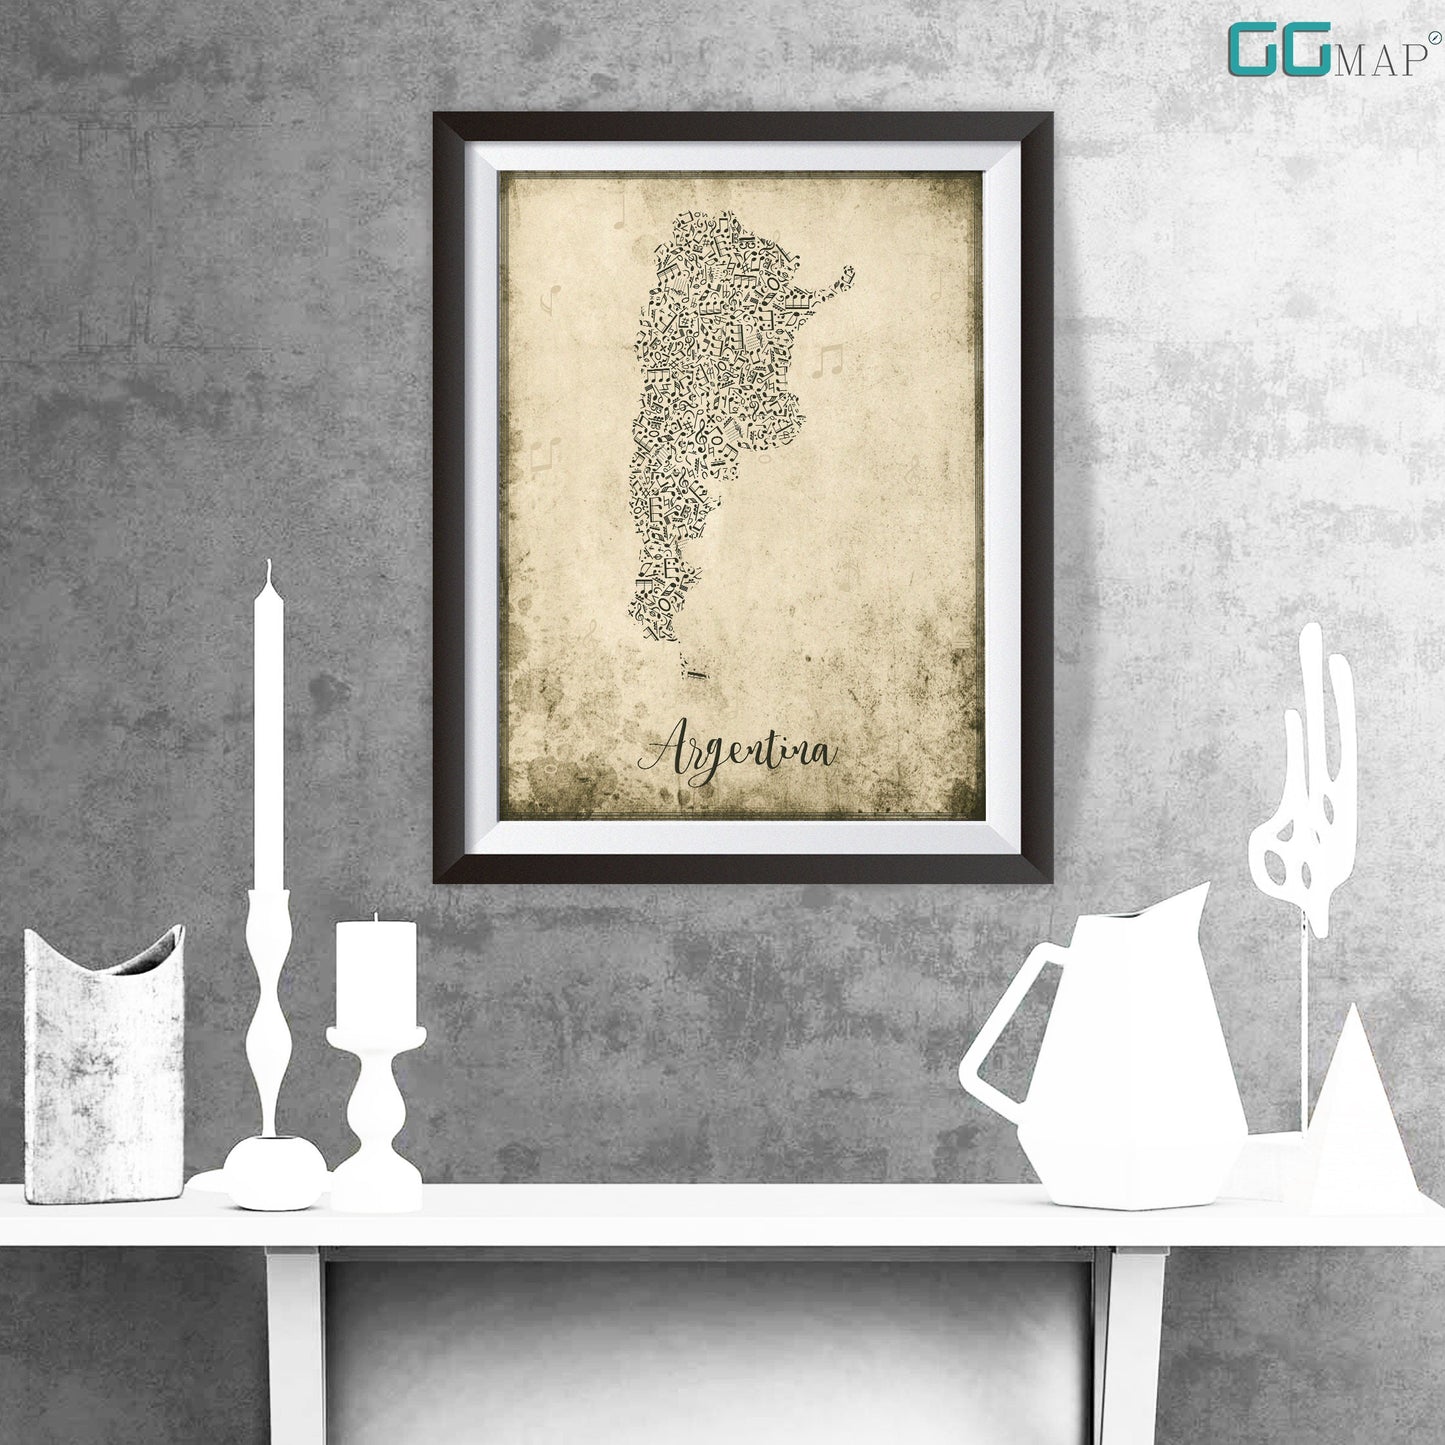 ARGENTINA map - Argentina Music map - Travel poster - Wall decor - Office map - Argentina gift - GGmap - Argentina poster